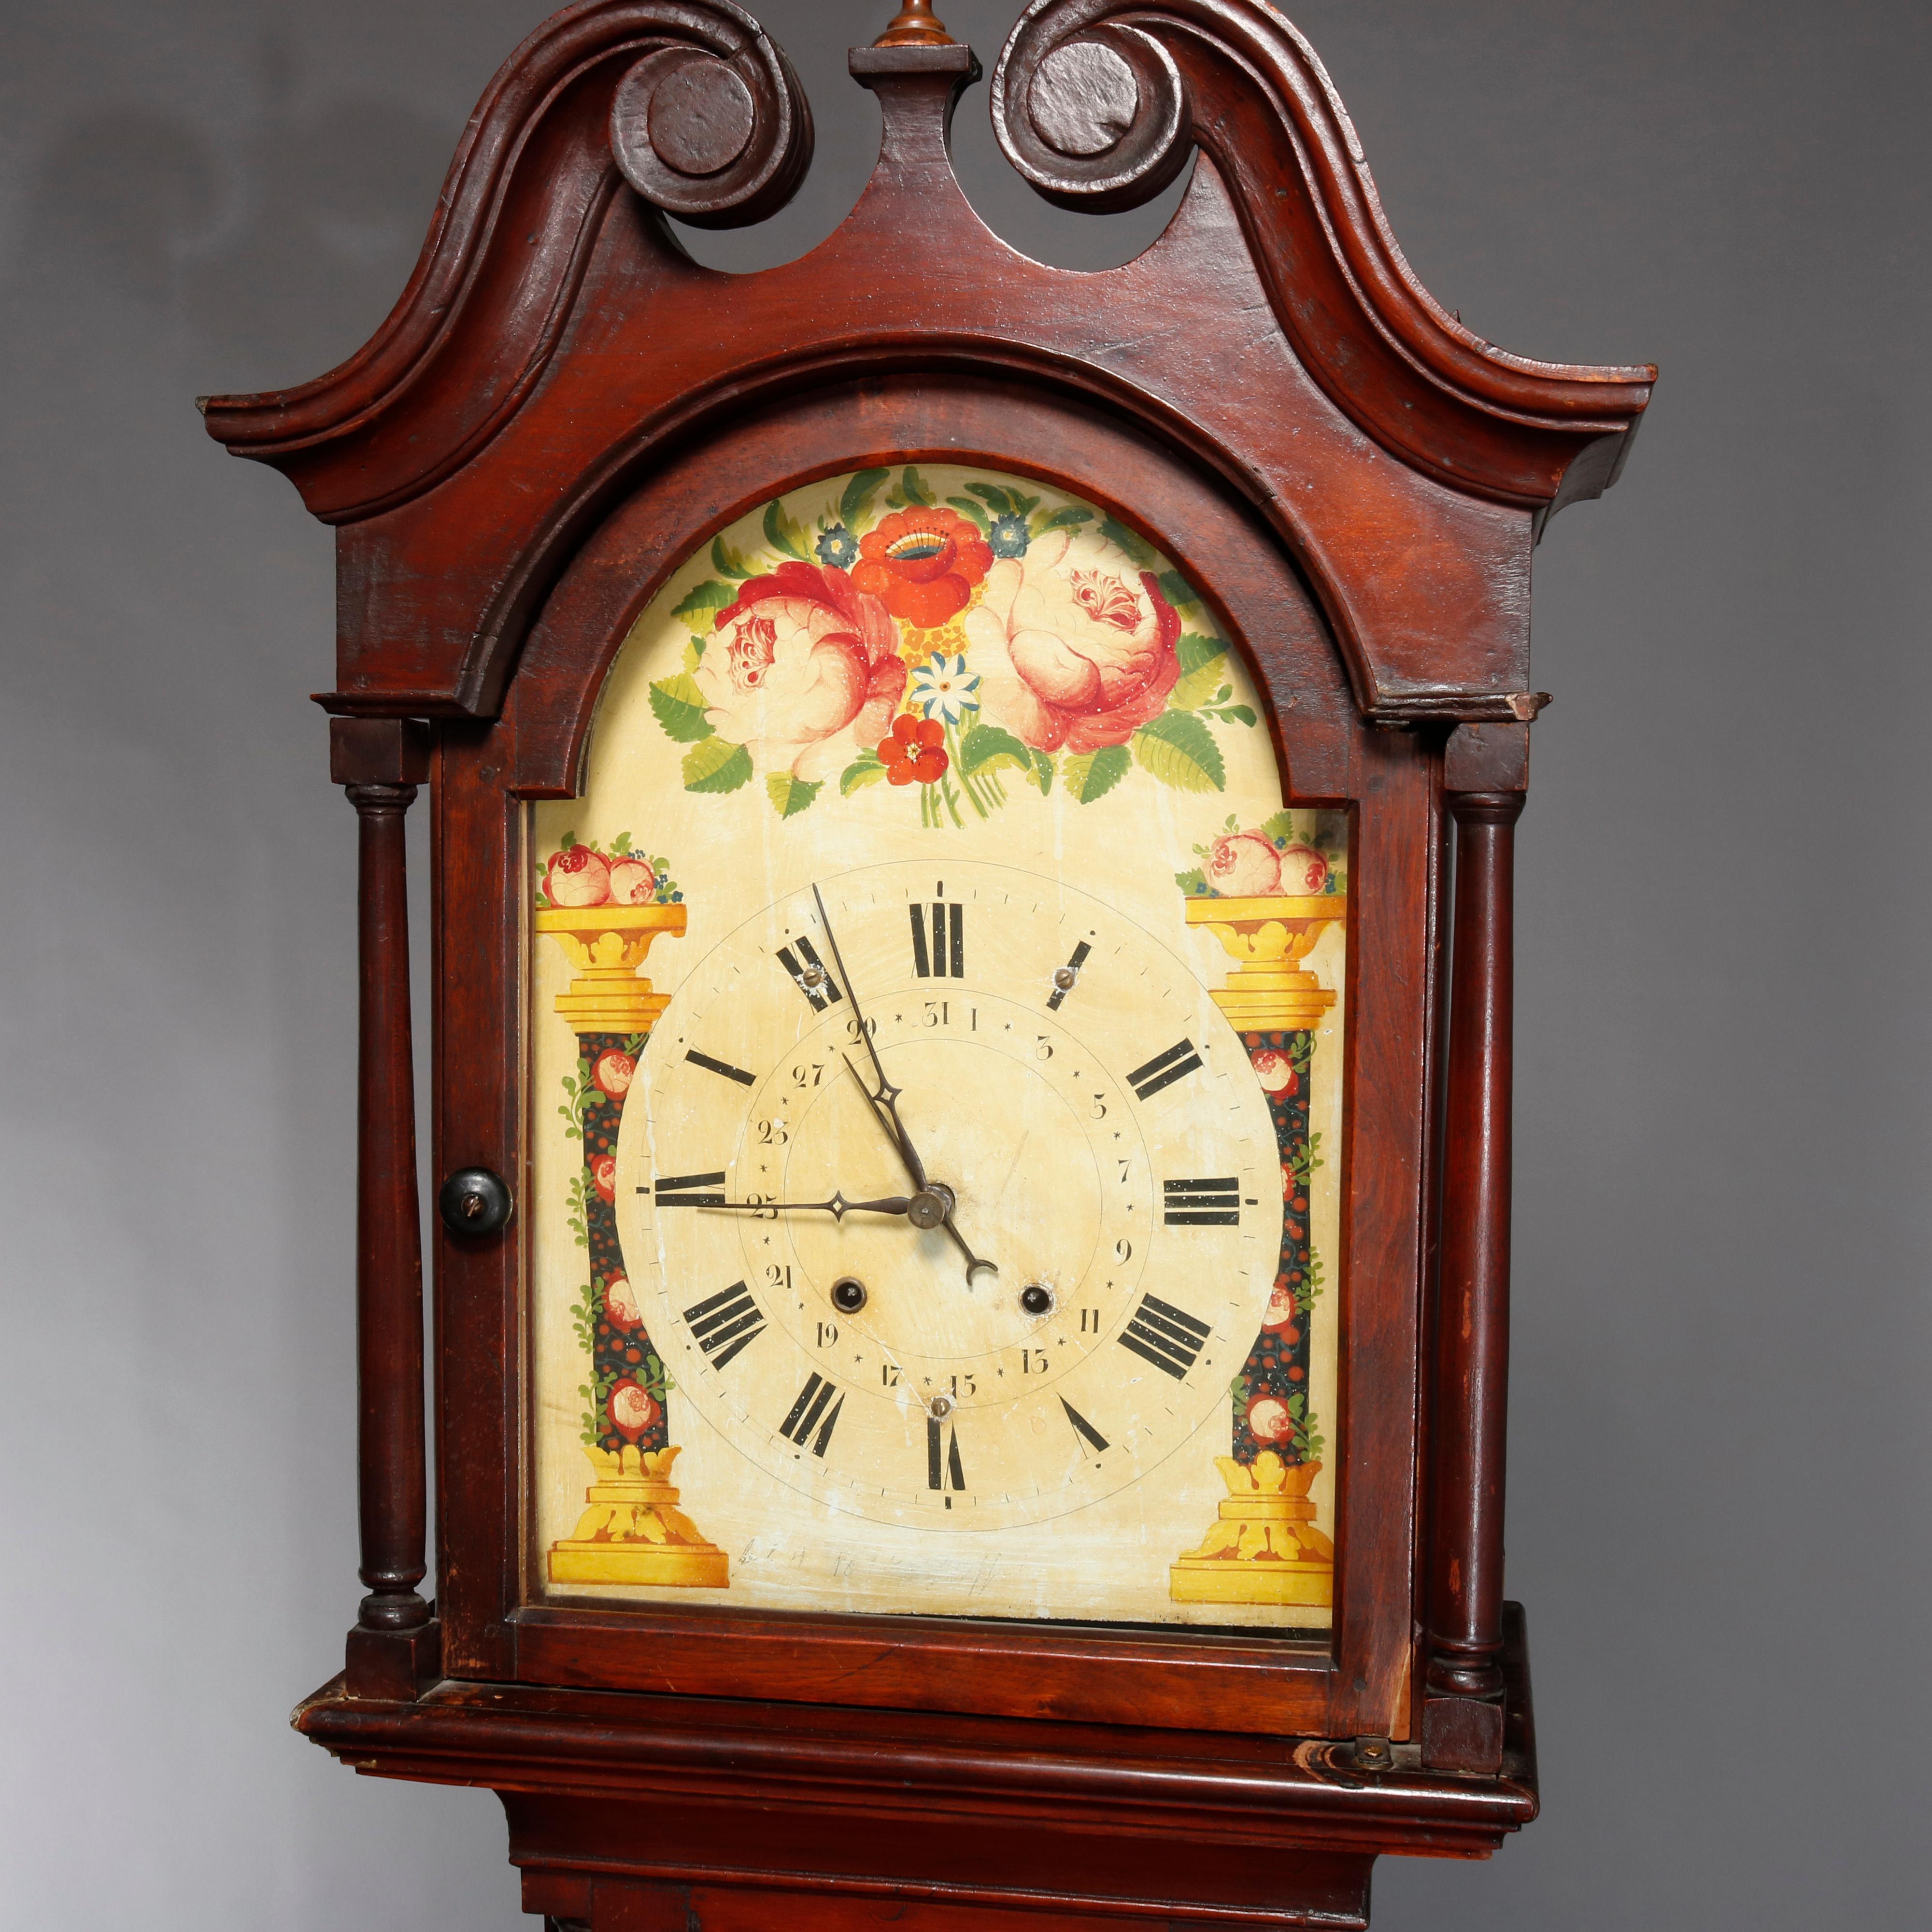 An antique Pennsylvania Federal longcase clock offers mahogany case with broken arch hood with central finial and flanking columns, hand painted floral face with Roman numerals, 18th century.

Measures: 99.25